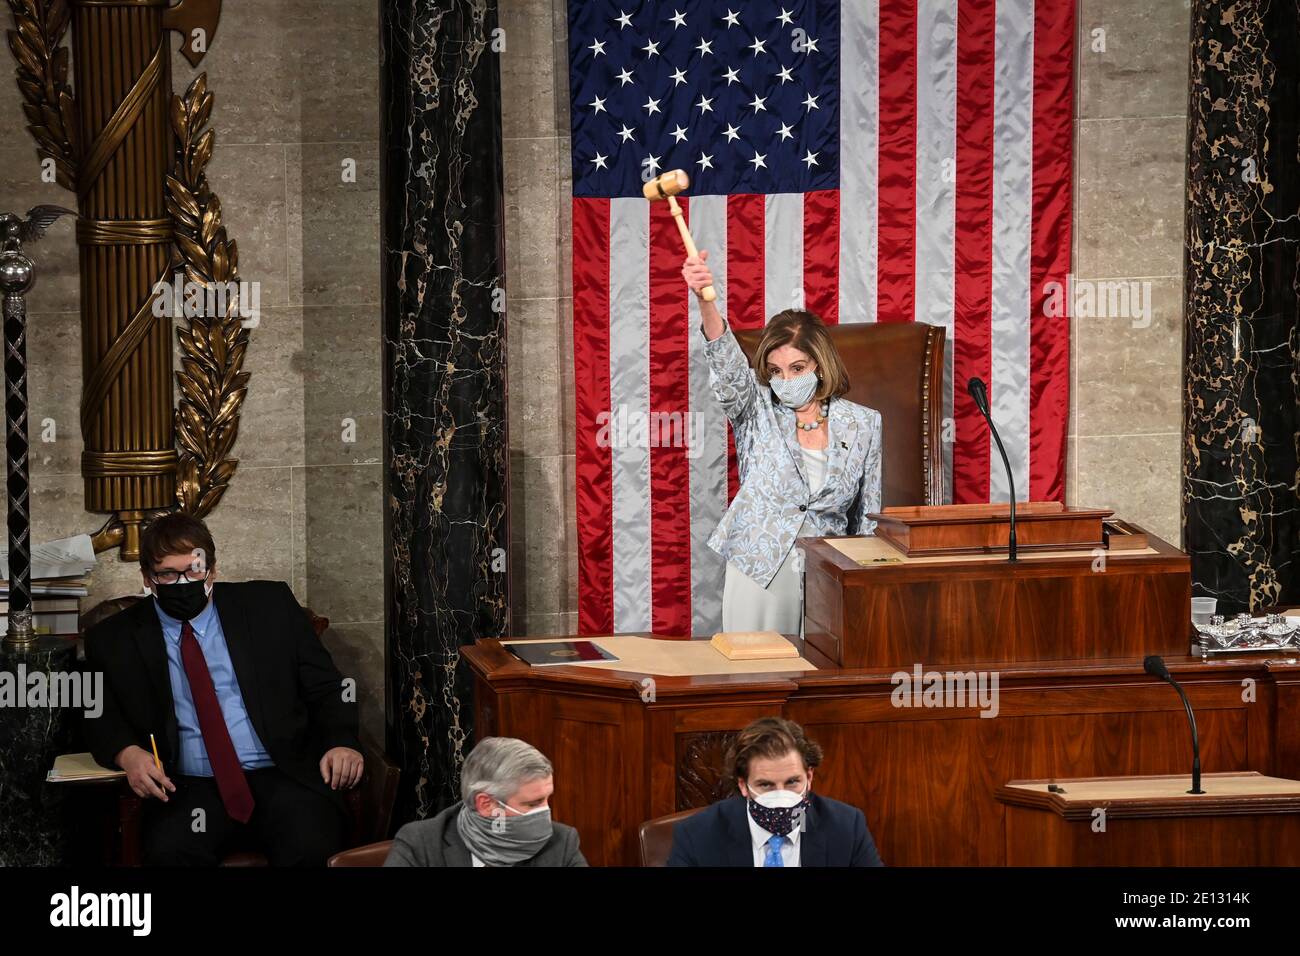 (210104) -- WASHINGTON, D.C., Jan. 4, 2021 (Xinhua) -- U.S. House Speaker Nancy Pelosi waves a gavel during the first session of the 117th U.S. Congress in the House Chamber on Capitol Hill in Washington, DC, the United States, Jan. 3, 2021. Democratic Congresswoman Nancy Pelosi of California was reelected on Sunday as speaker of the U.S. House of Representatives, where her party has a narrow majority. (Bill O'Leary/Pool via Xinhua) Stock Photo